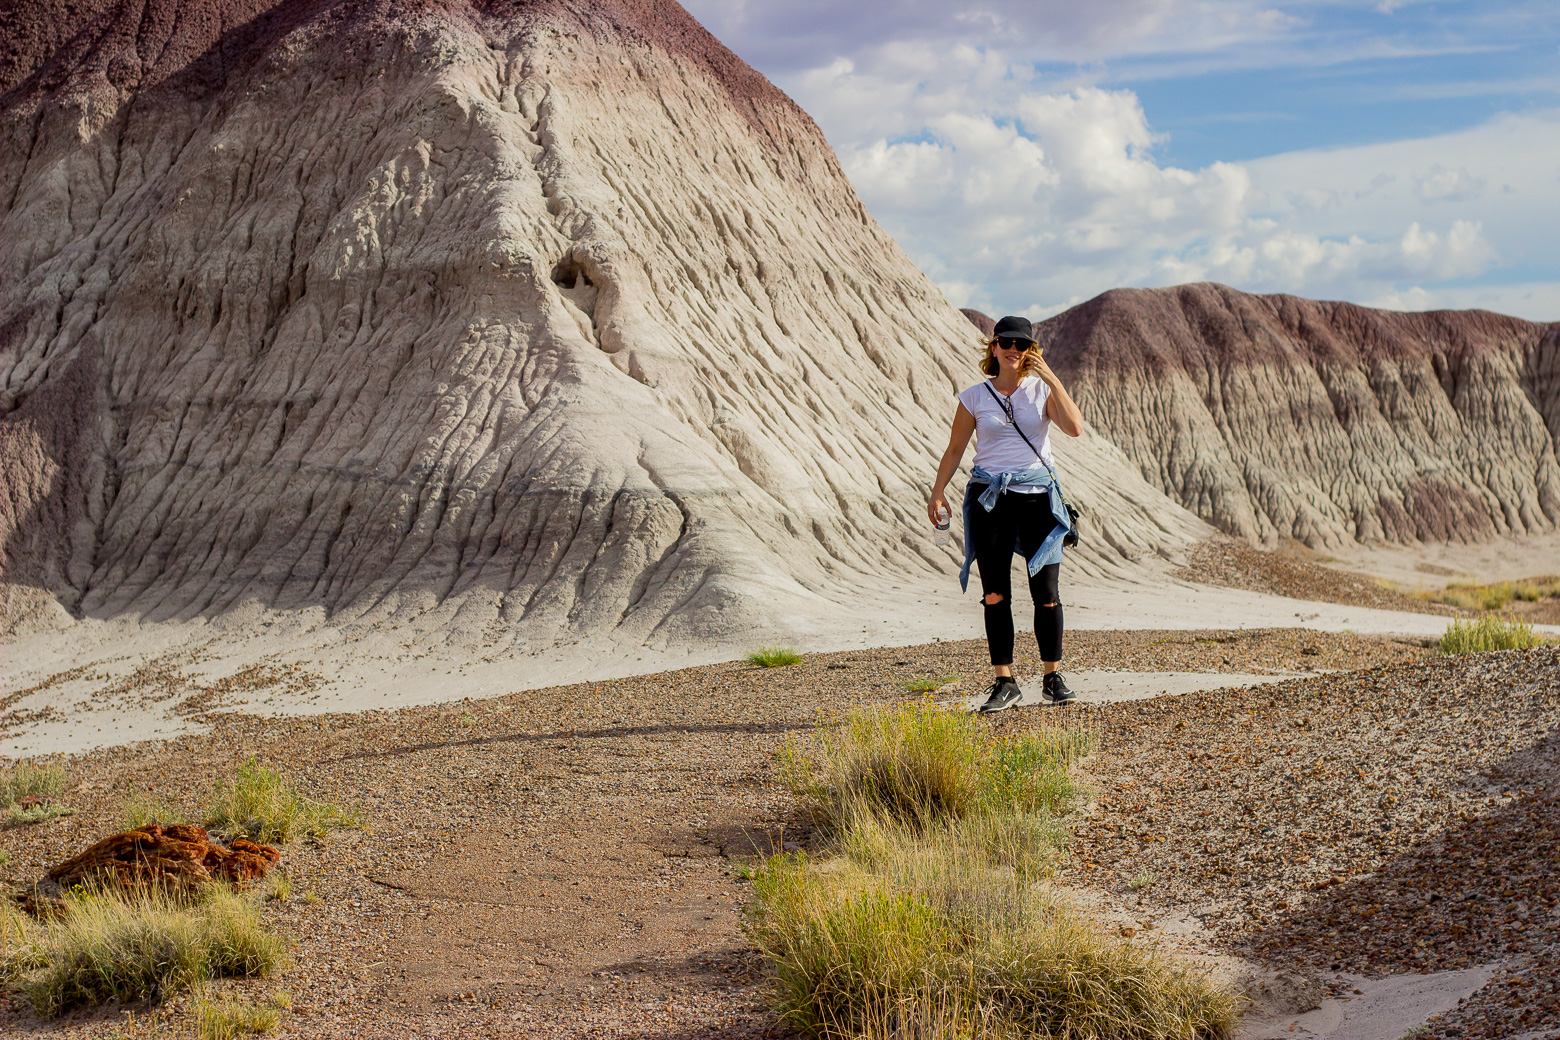 TRAVEL DIARY: LAS VEGAS, PETRIFIED FOREST, GRAND CANYON, HOOVER DAM